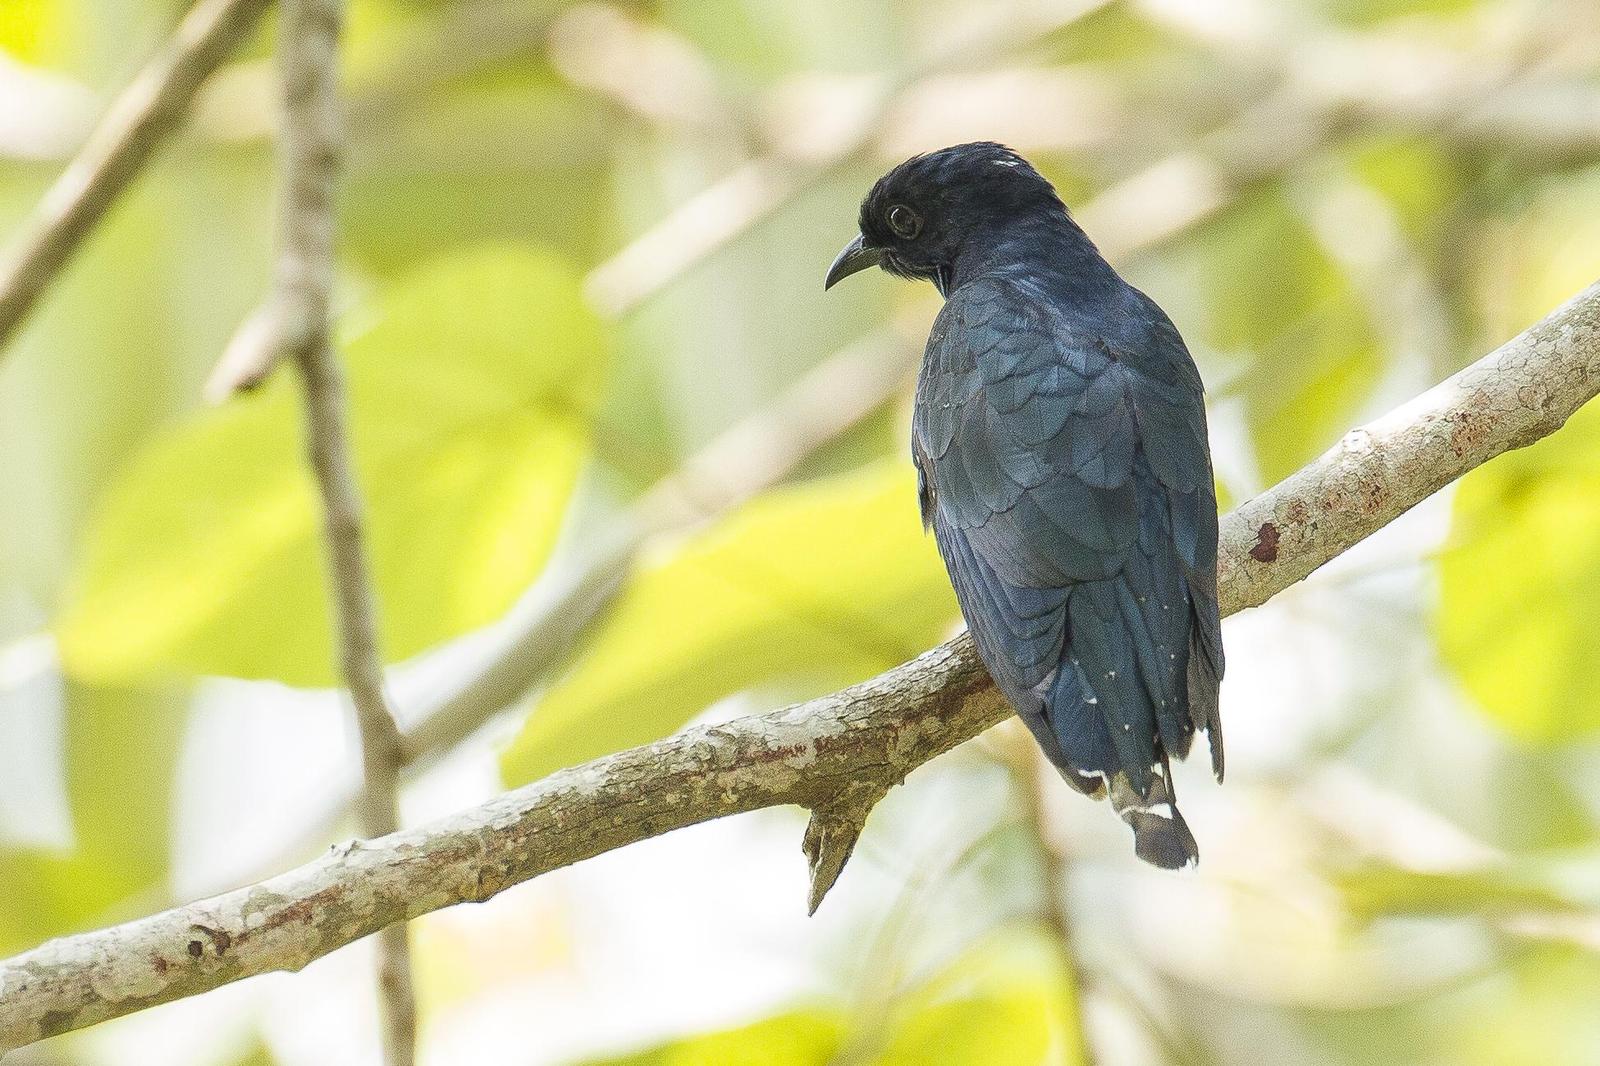 Square-tailed Drongo-Cuckoo Photo by Jeff Schwilk